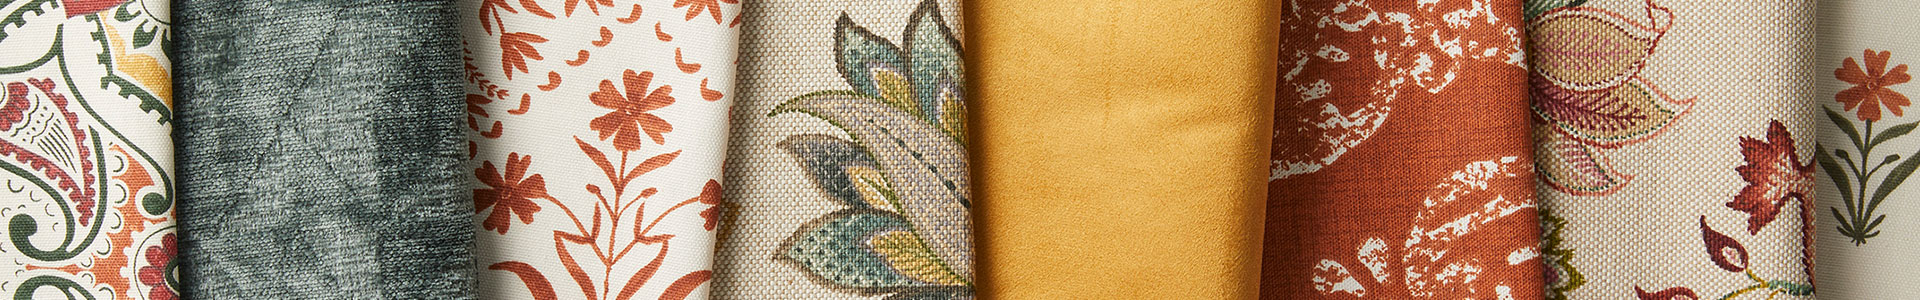 Stacks of home decor fabrics in fall colors and prints